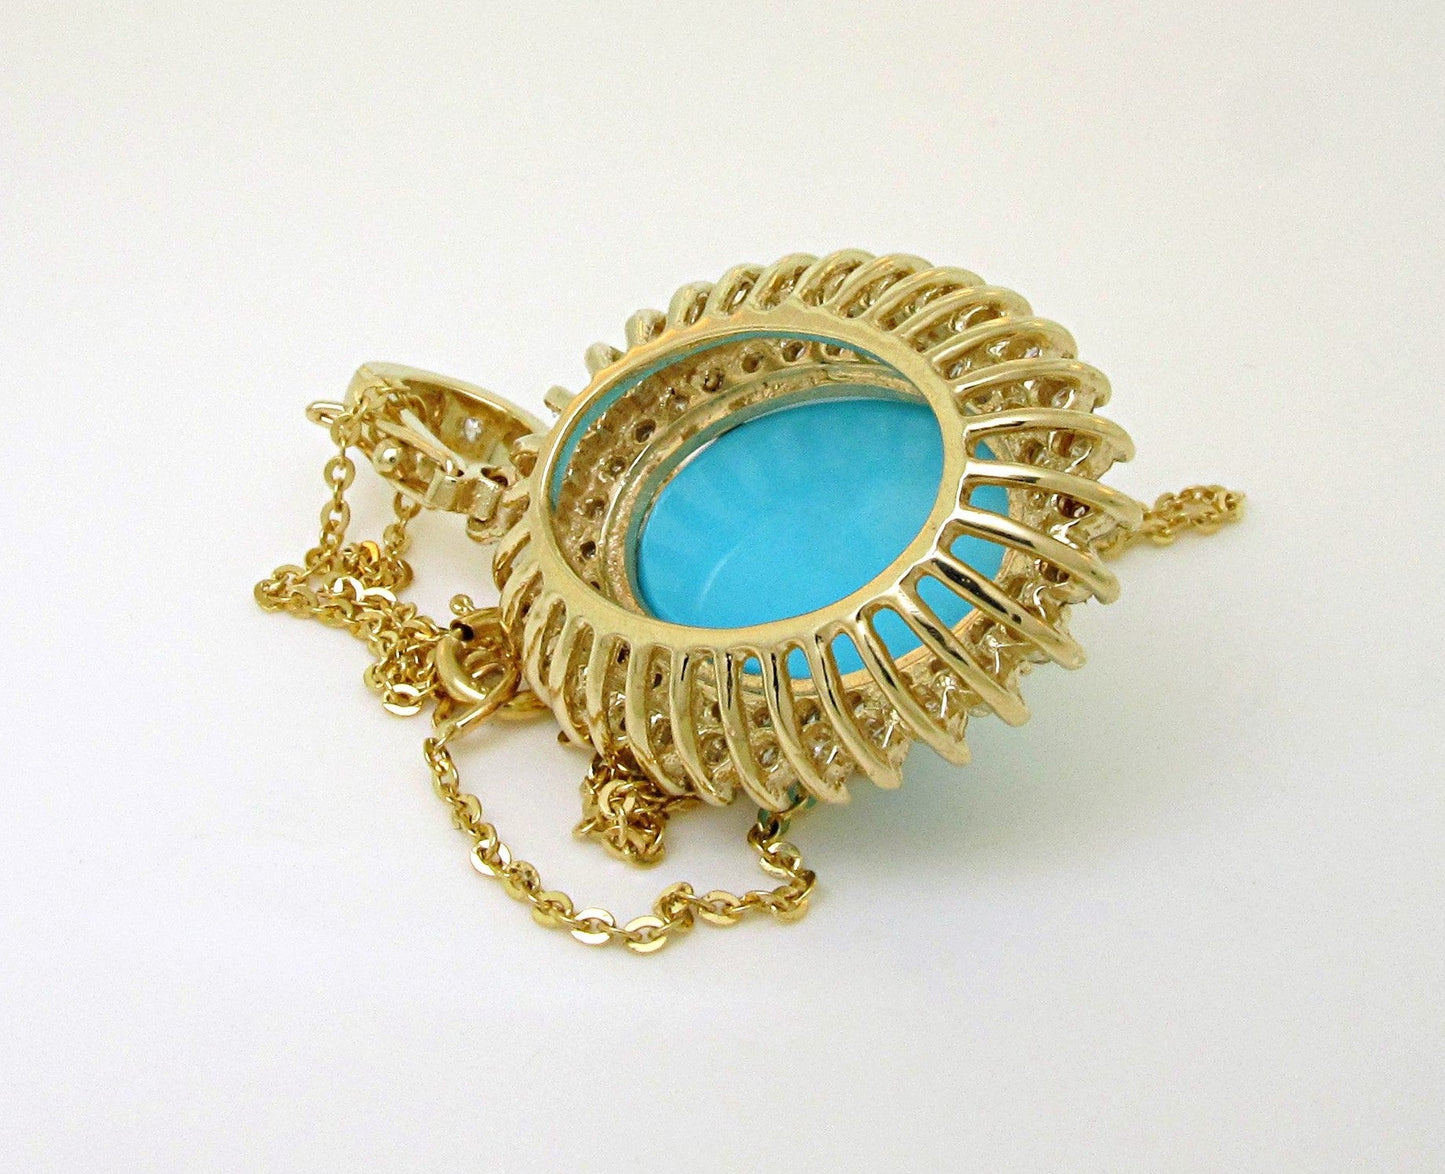 14k yellow gold Oval Turquoise and diamond pendant with enhancer - In House Treasure